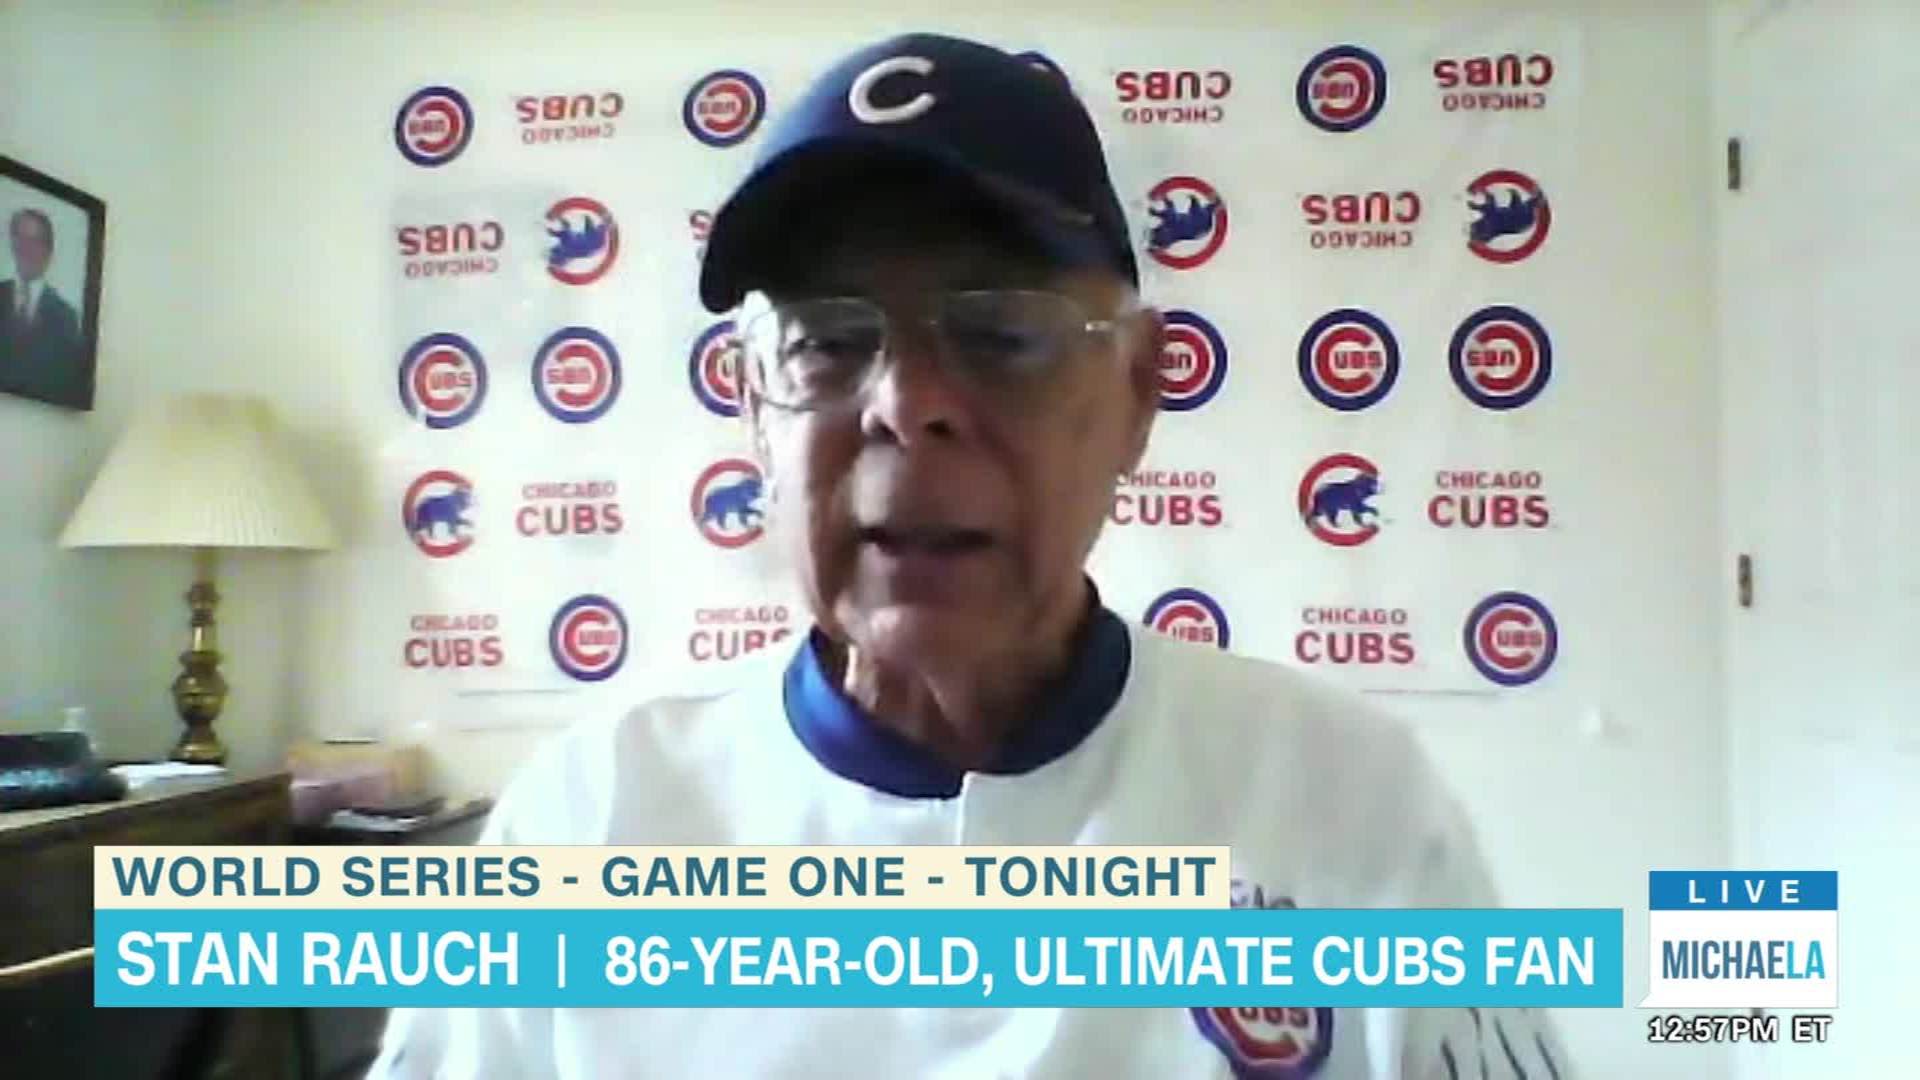 For this 81-year-old Cubs fan, long-awaited return to World Series about  family as much as baseball – New York Daily News